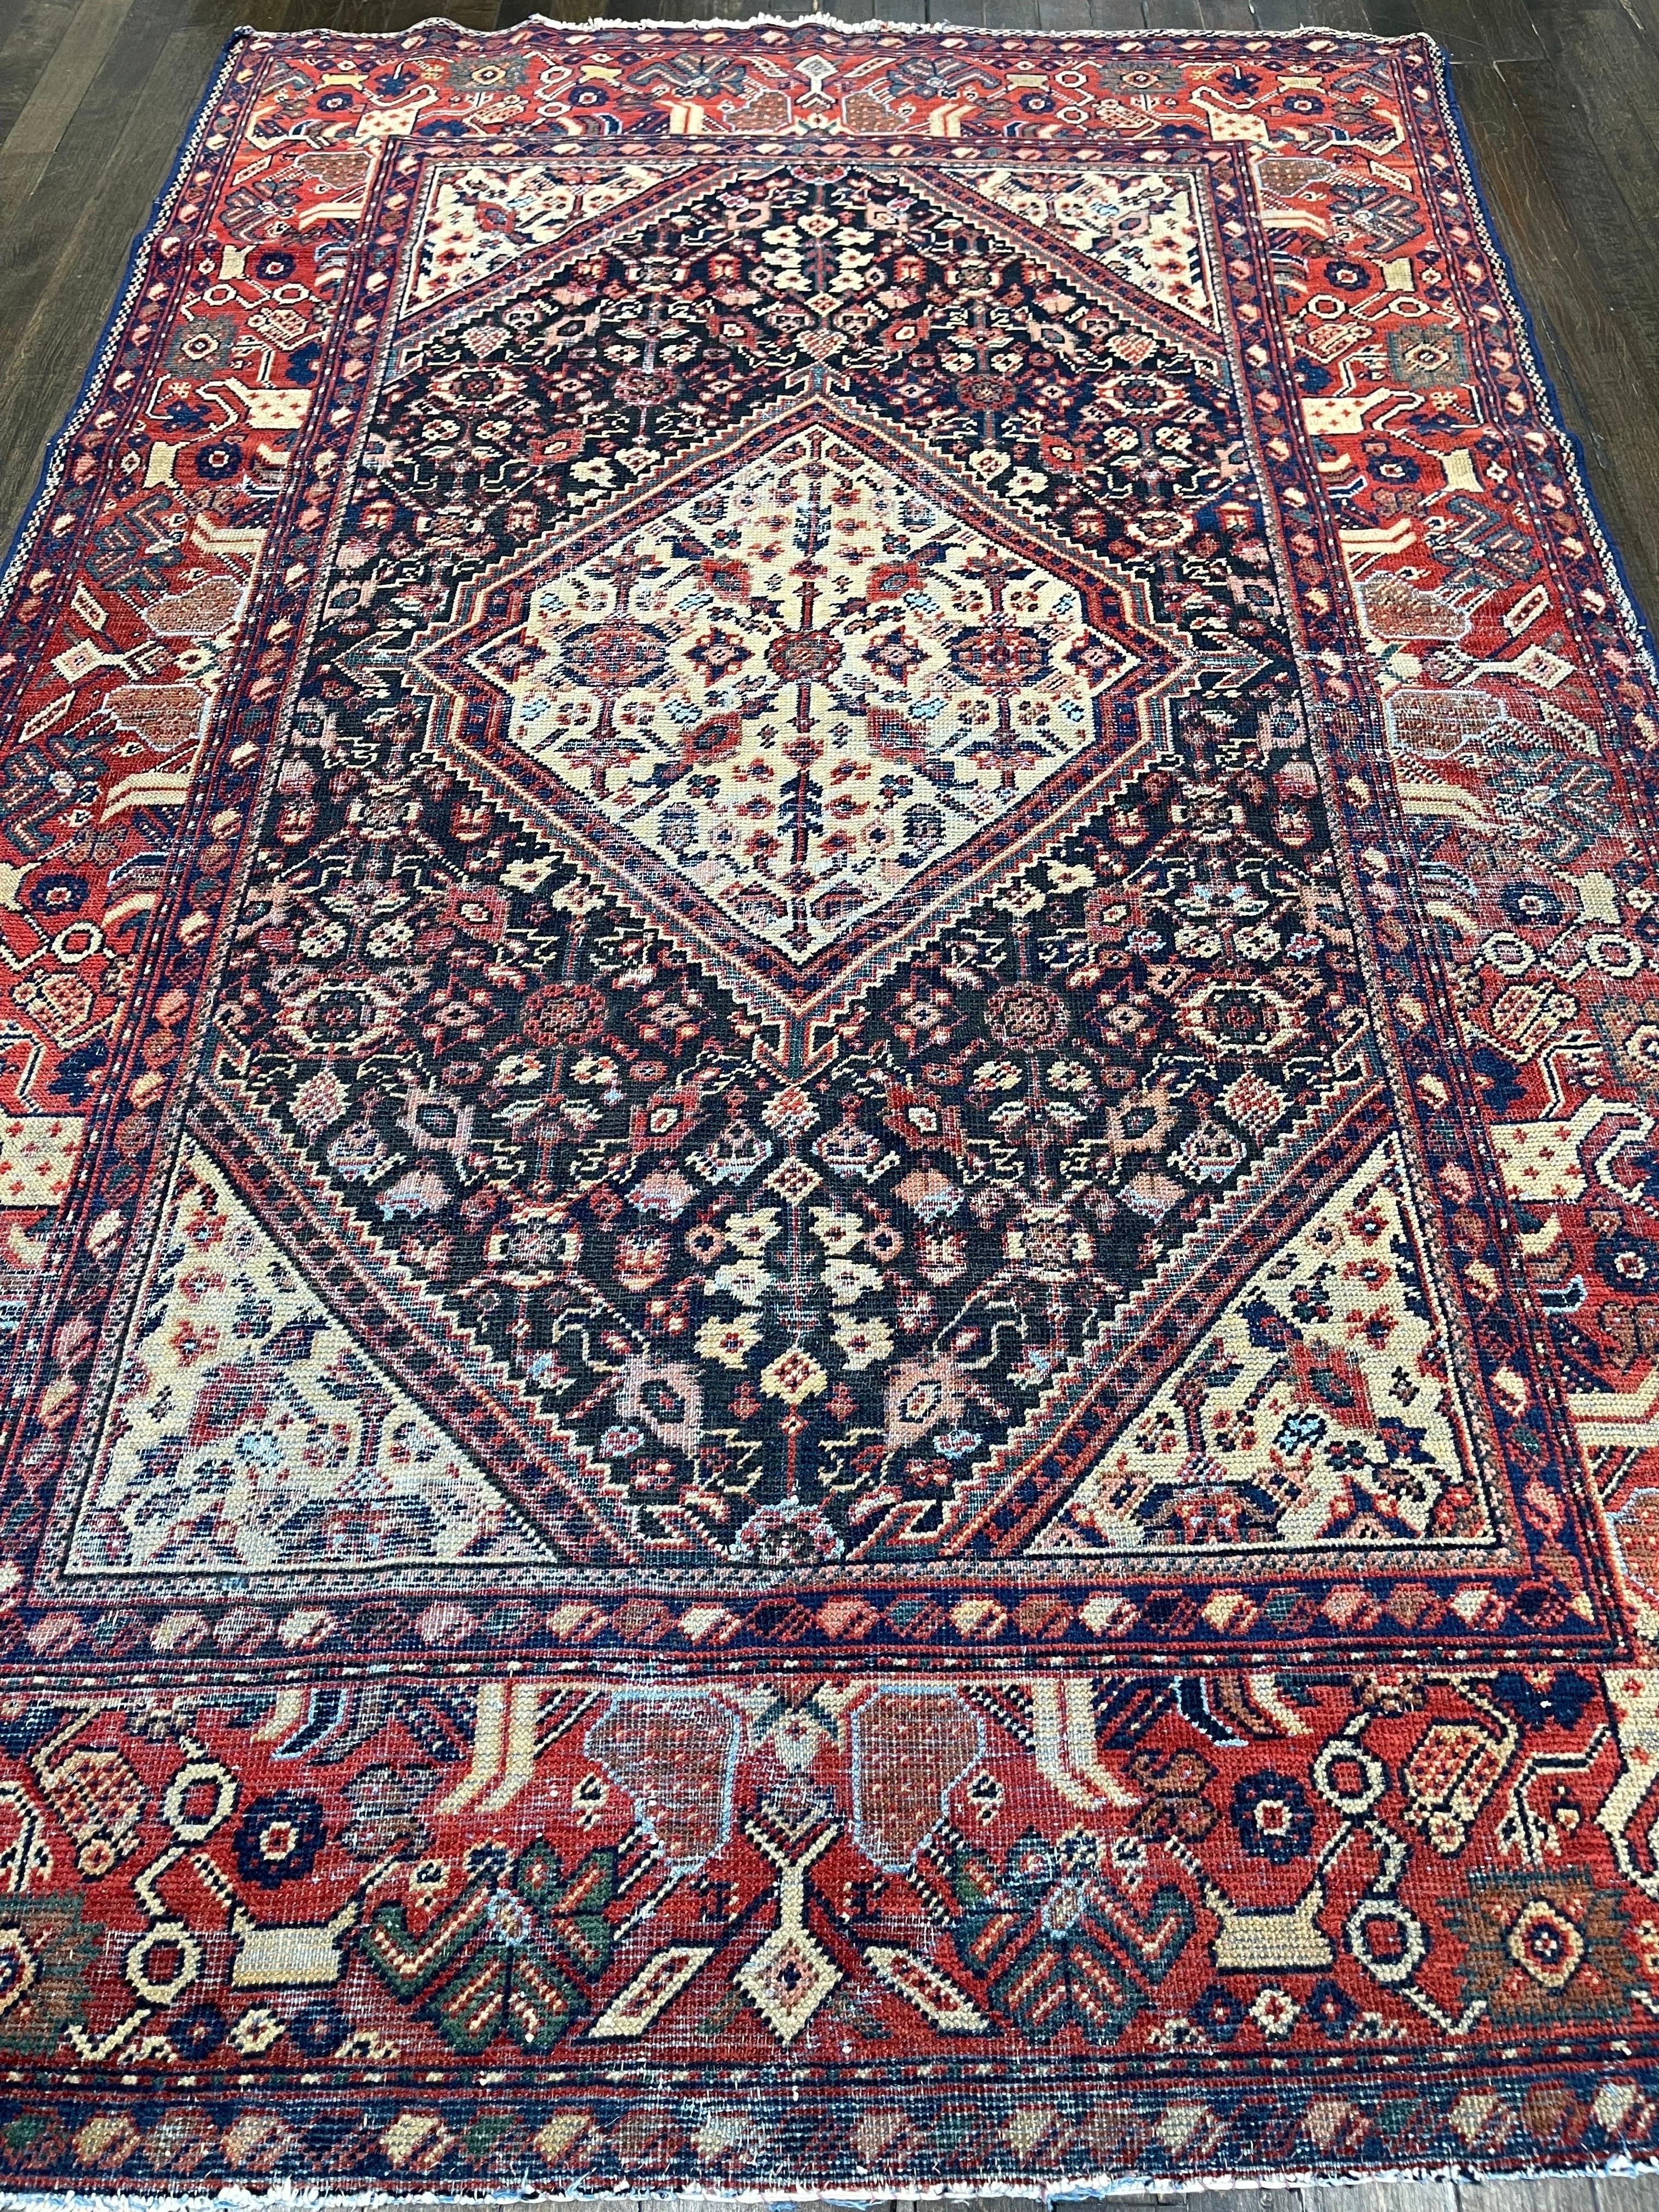 A rustic antique Persian Mahal, this rug is an attractive accent piece having a navy blue field closely covered by a medium scale classic Herati pattern. An authentic turn of the century distressed carpet with very low pile that has maintained its